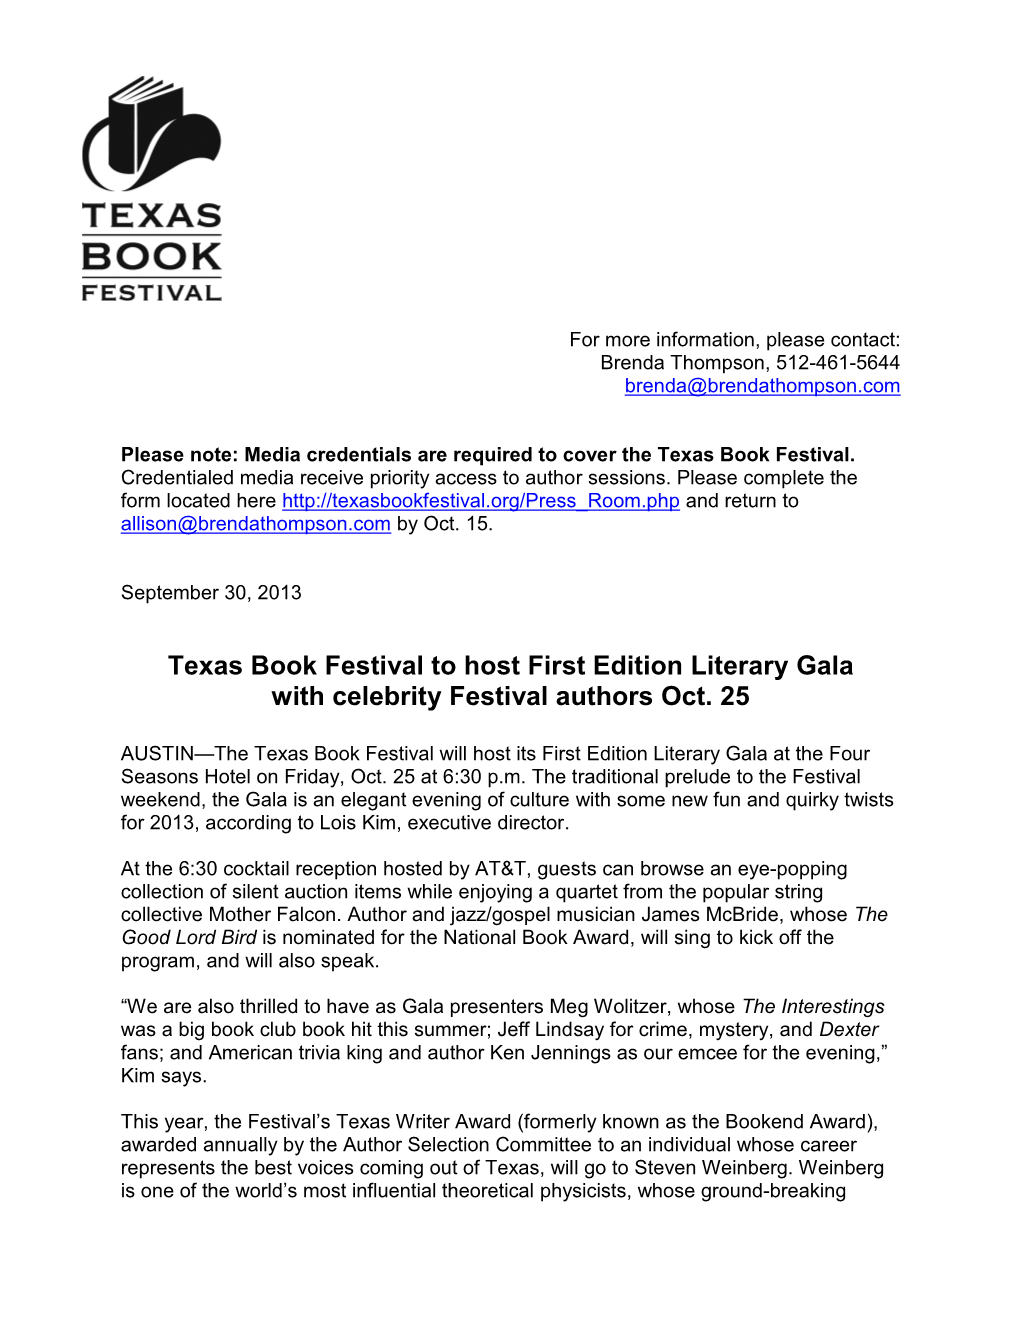 Texas Book Festival to Host First Edition Literary Gala with Celebrity Festival Authors Oct